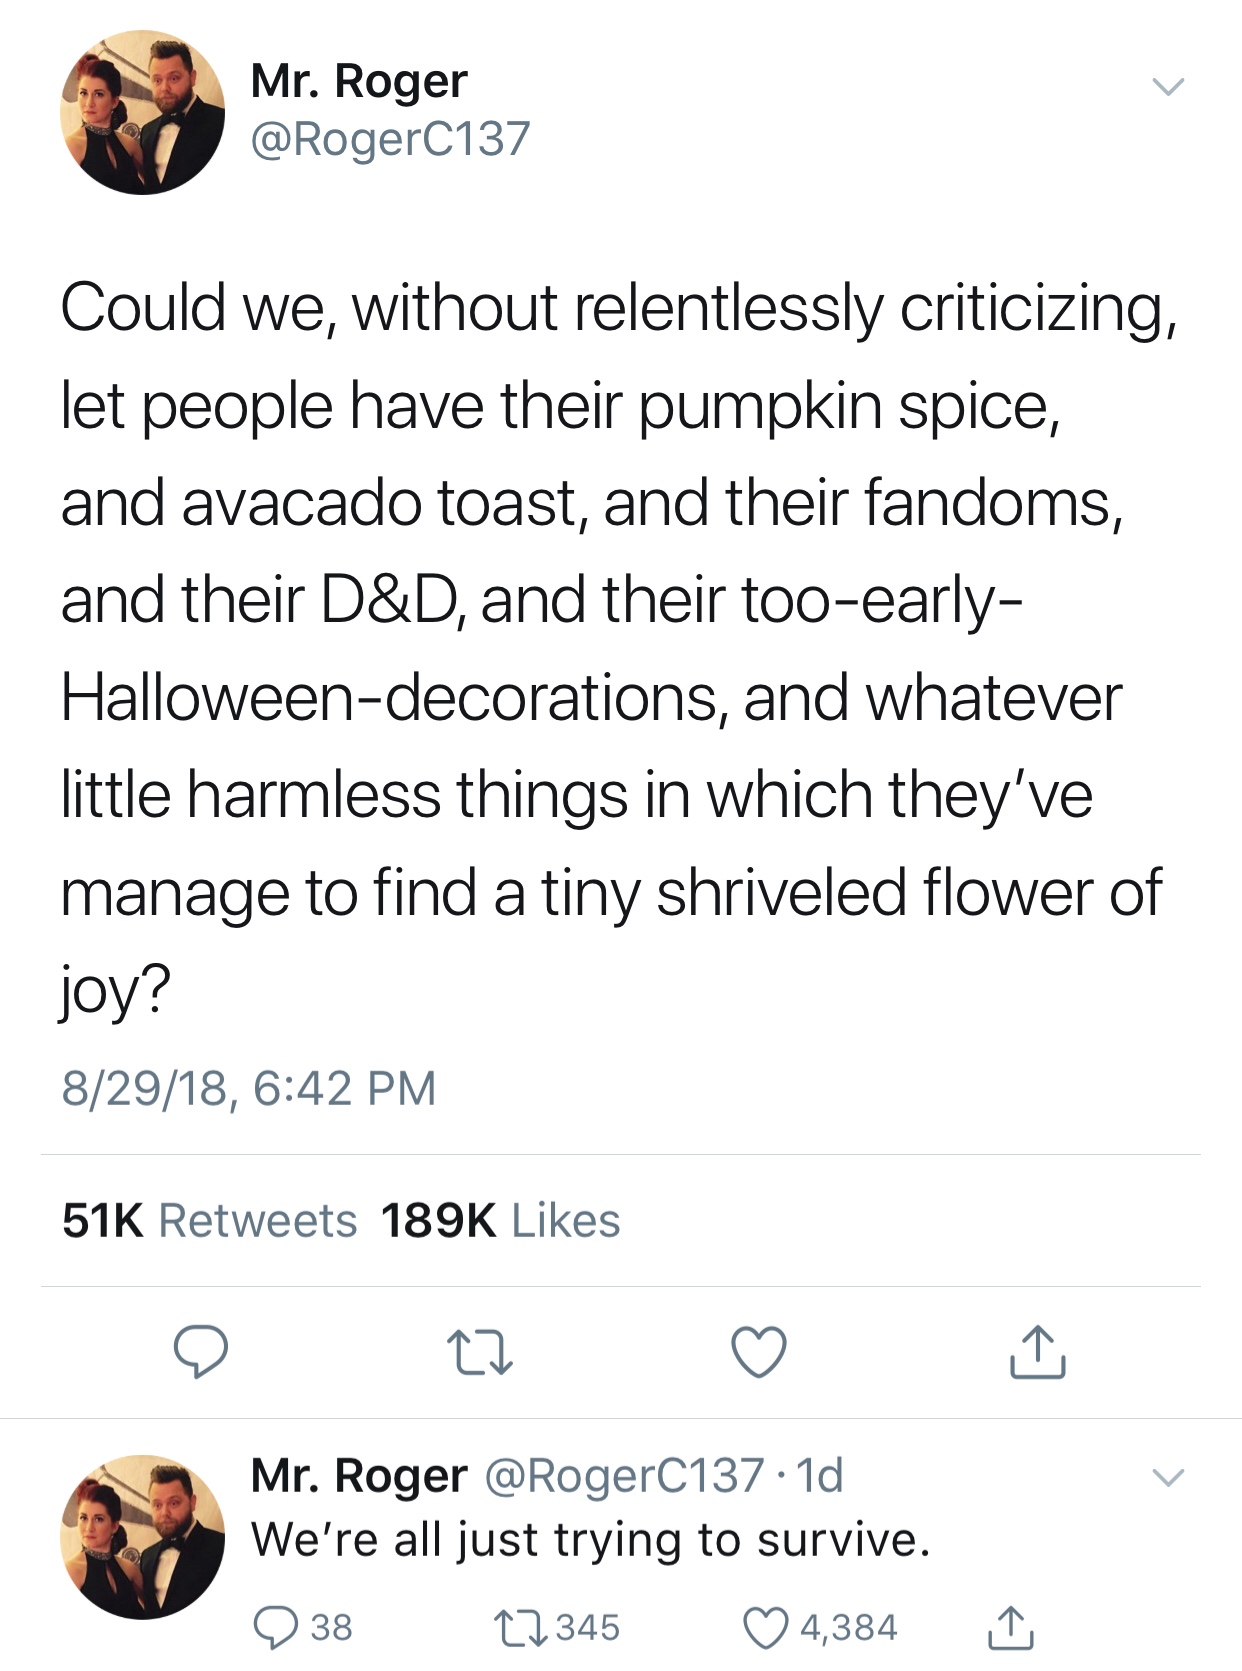 document - Mr. Roger Could we, without relentlessly criticizing, let people have their pumpkin spice, and avacado toast, and their fandoms, and their D&D, and their tooearly Halloweendecorations, and whatever little harmless things in which they've manage